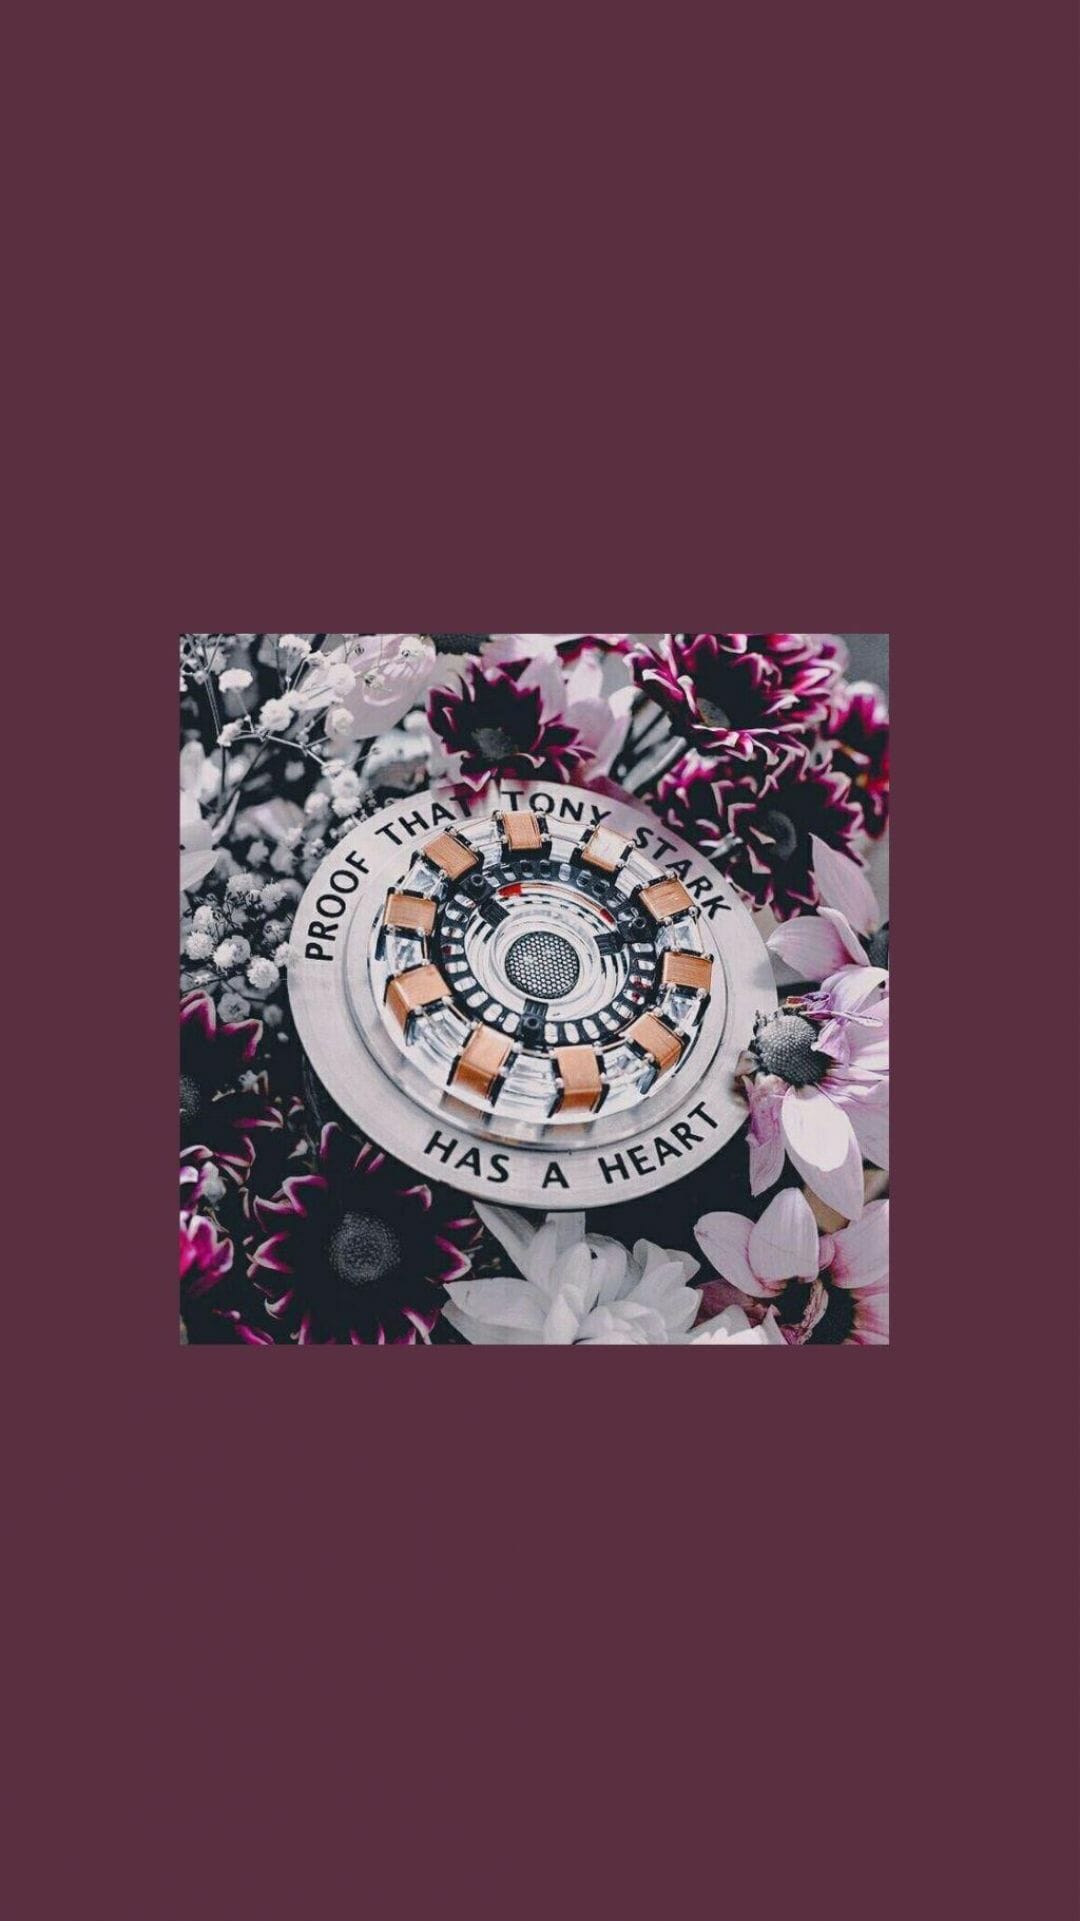 A phone wallpaper of the arc reactor from Iron Man with flowers in the background - Marvel, Avengers